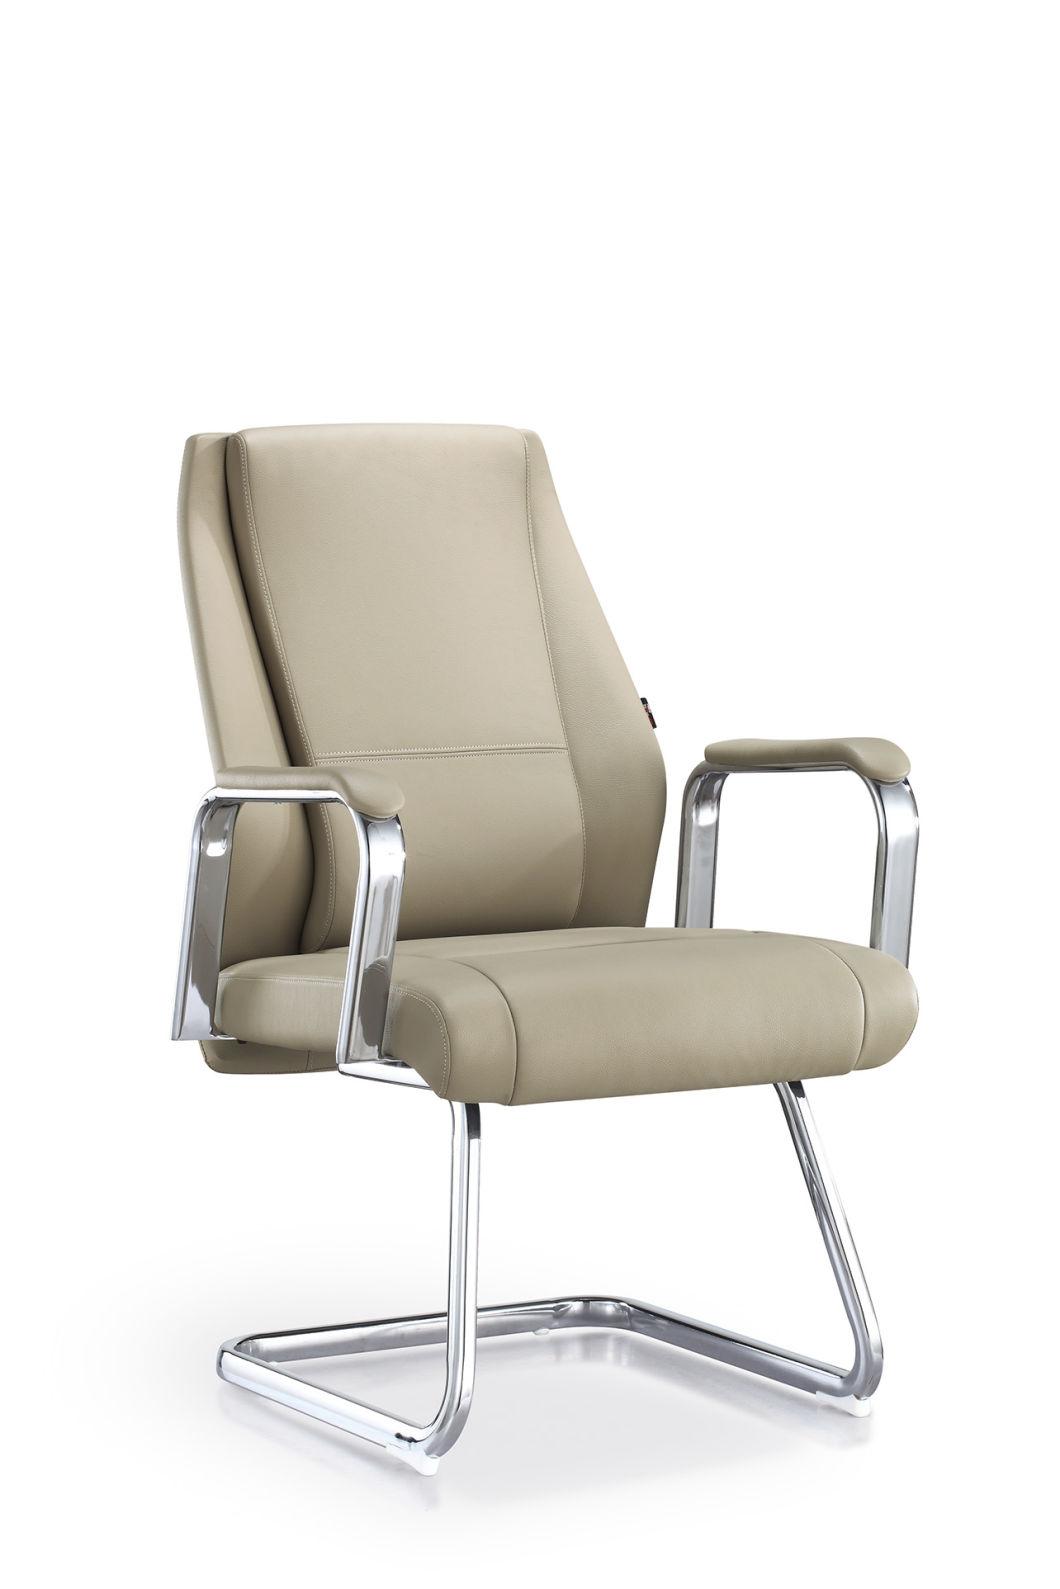 Wholesale Market Conference Meeting Chair PU Leather Chair